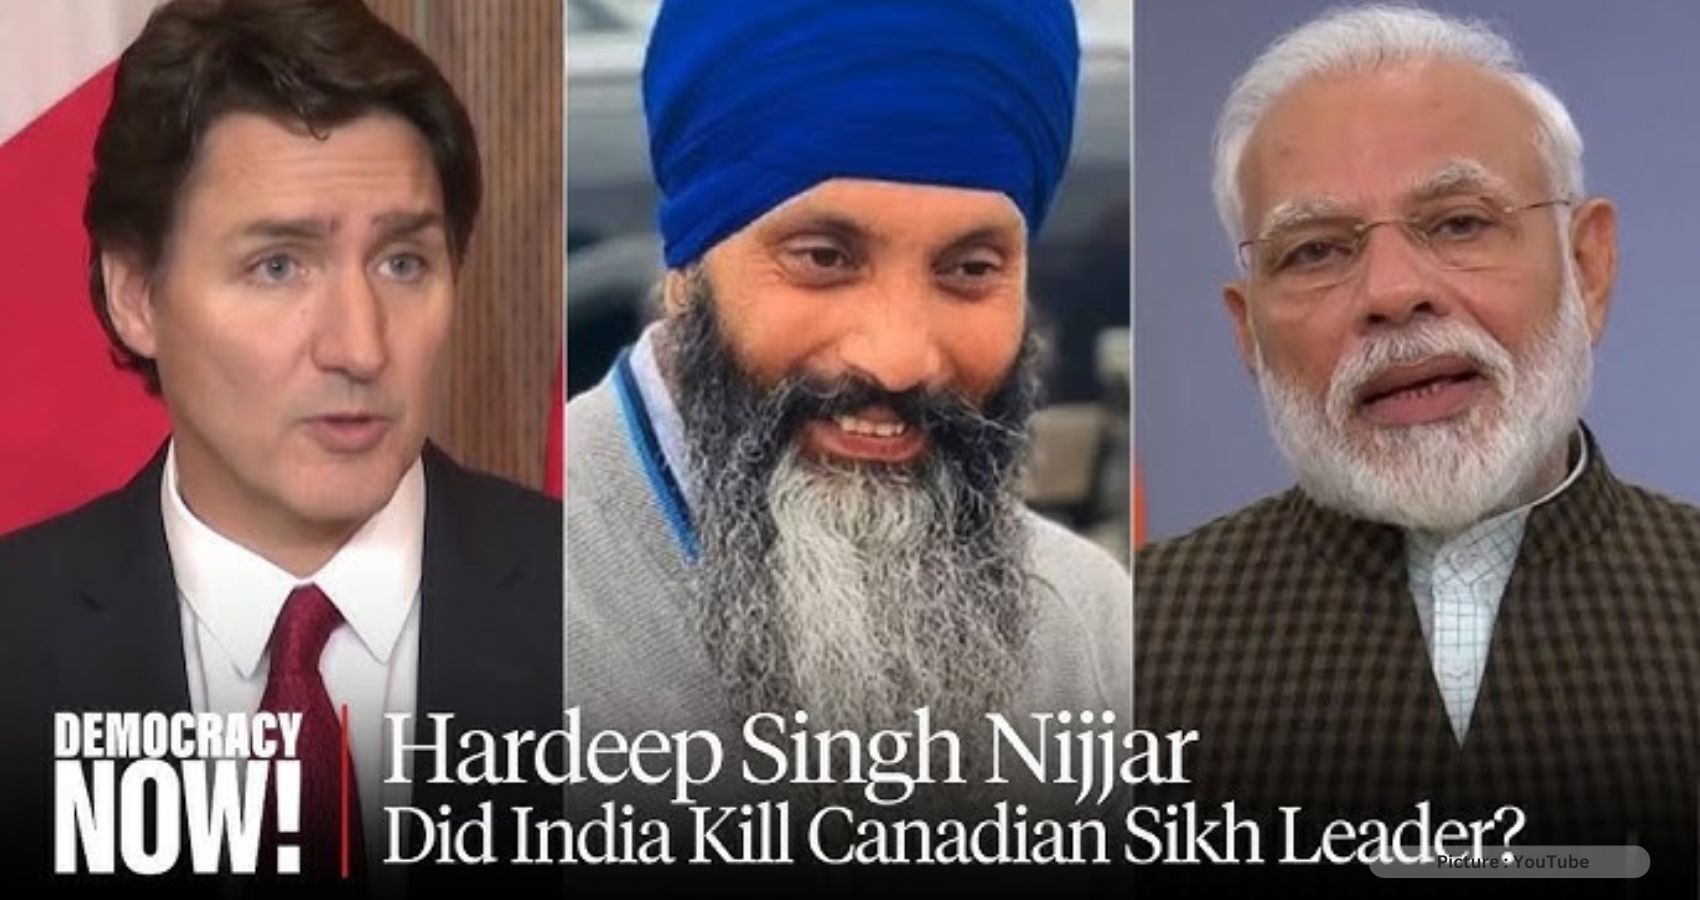 India Denies Role In Canadian Sikh Leader’s Murder